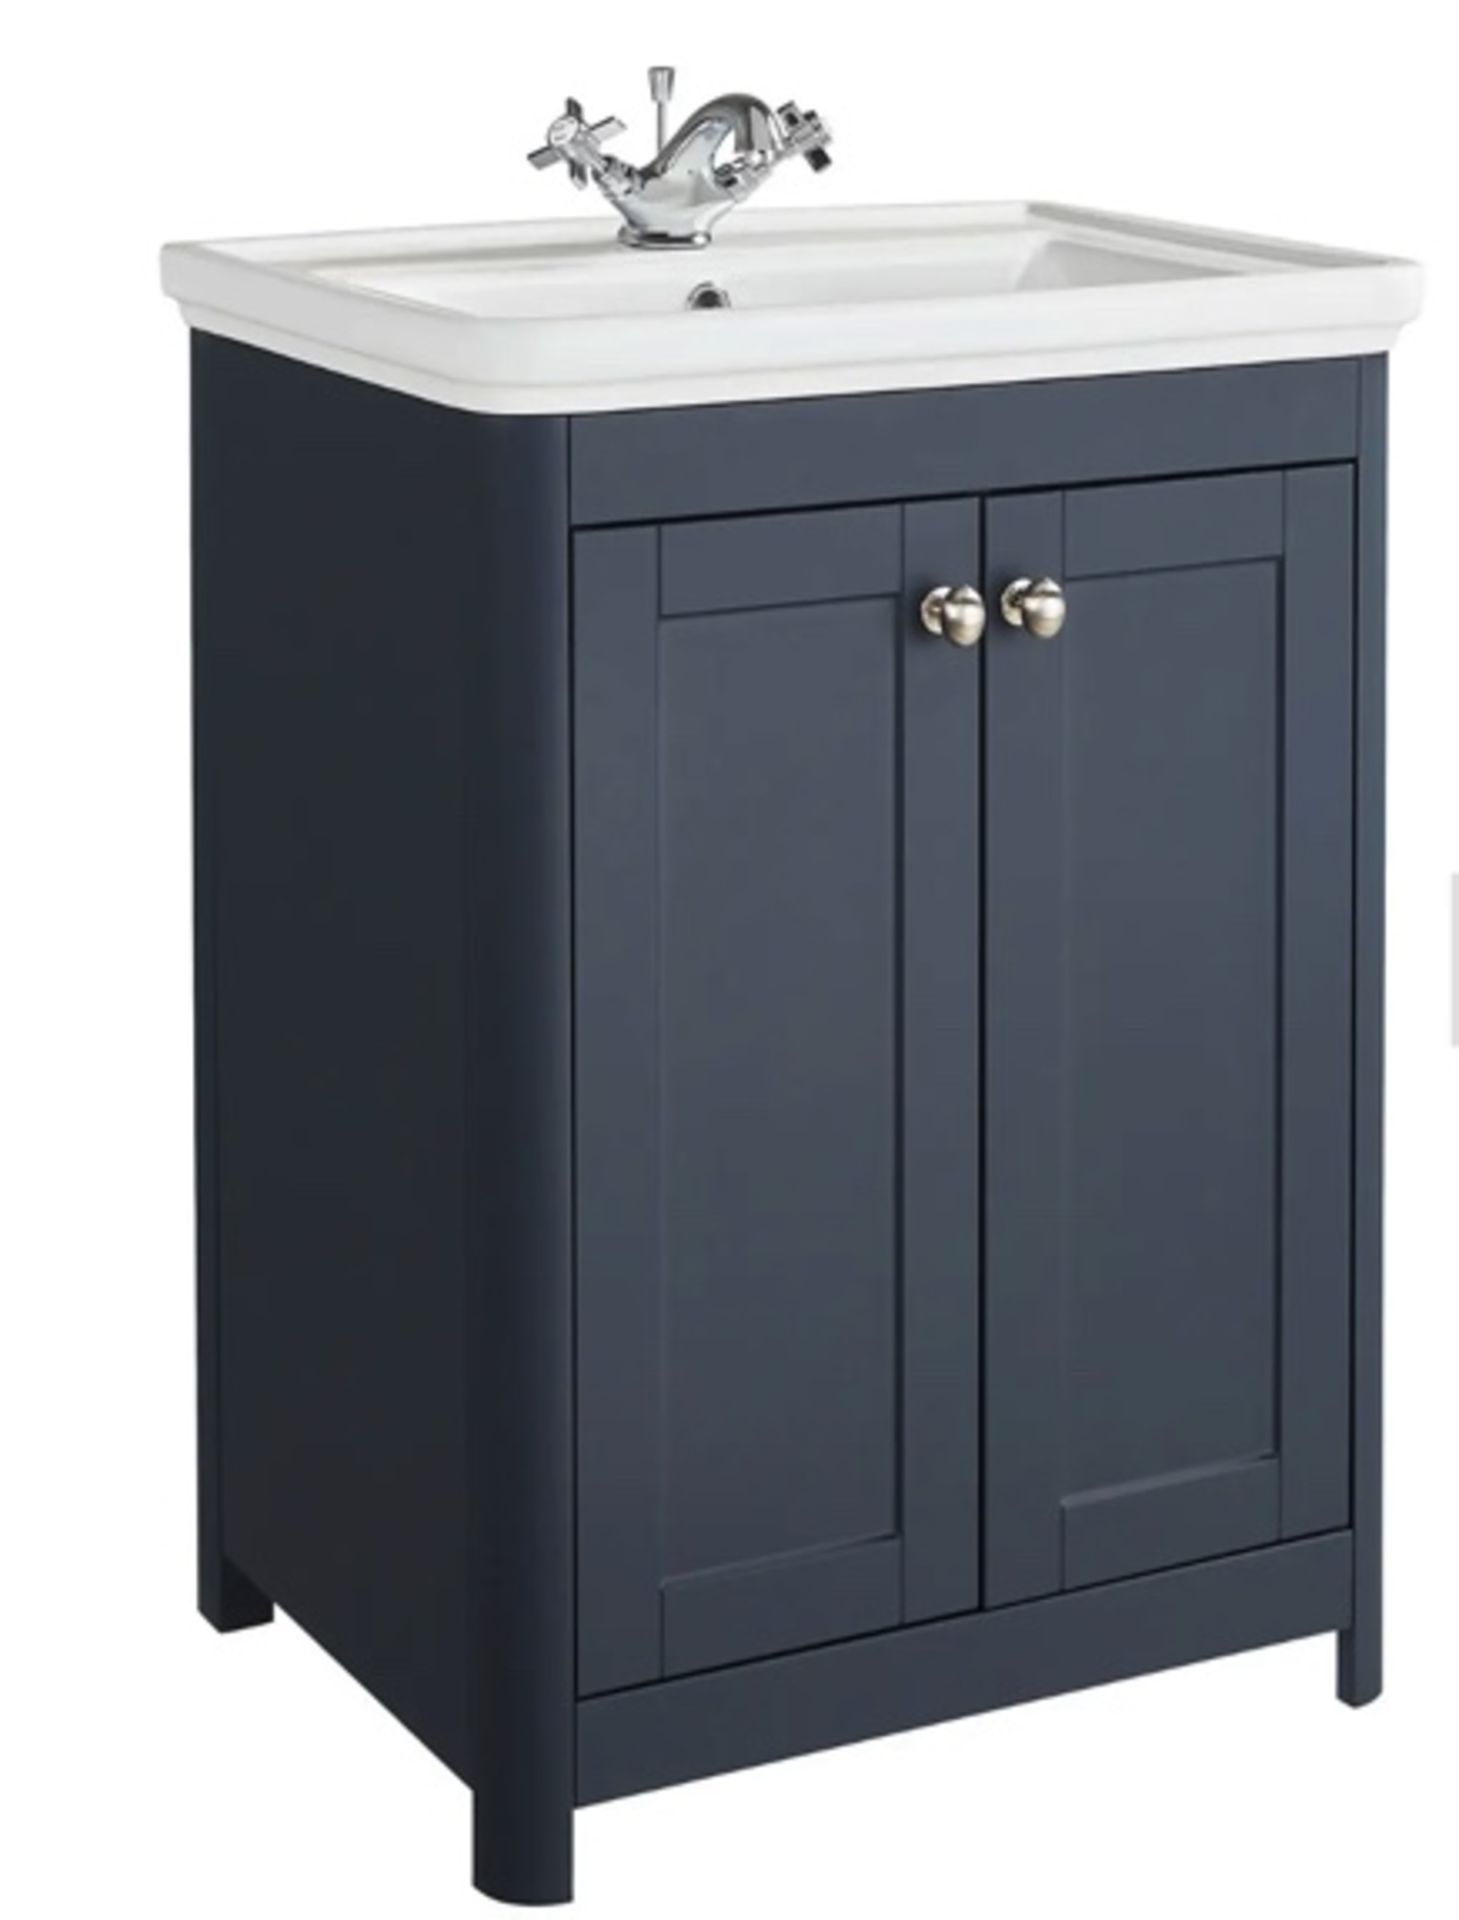 Brand New Boxed Bathstore Country Living Wicklow 600 Basin Unit - Navy RRP £565 **No Vat**